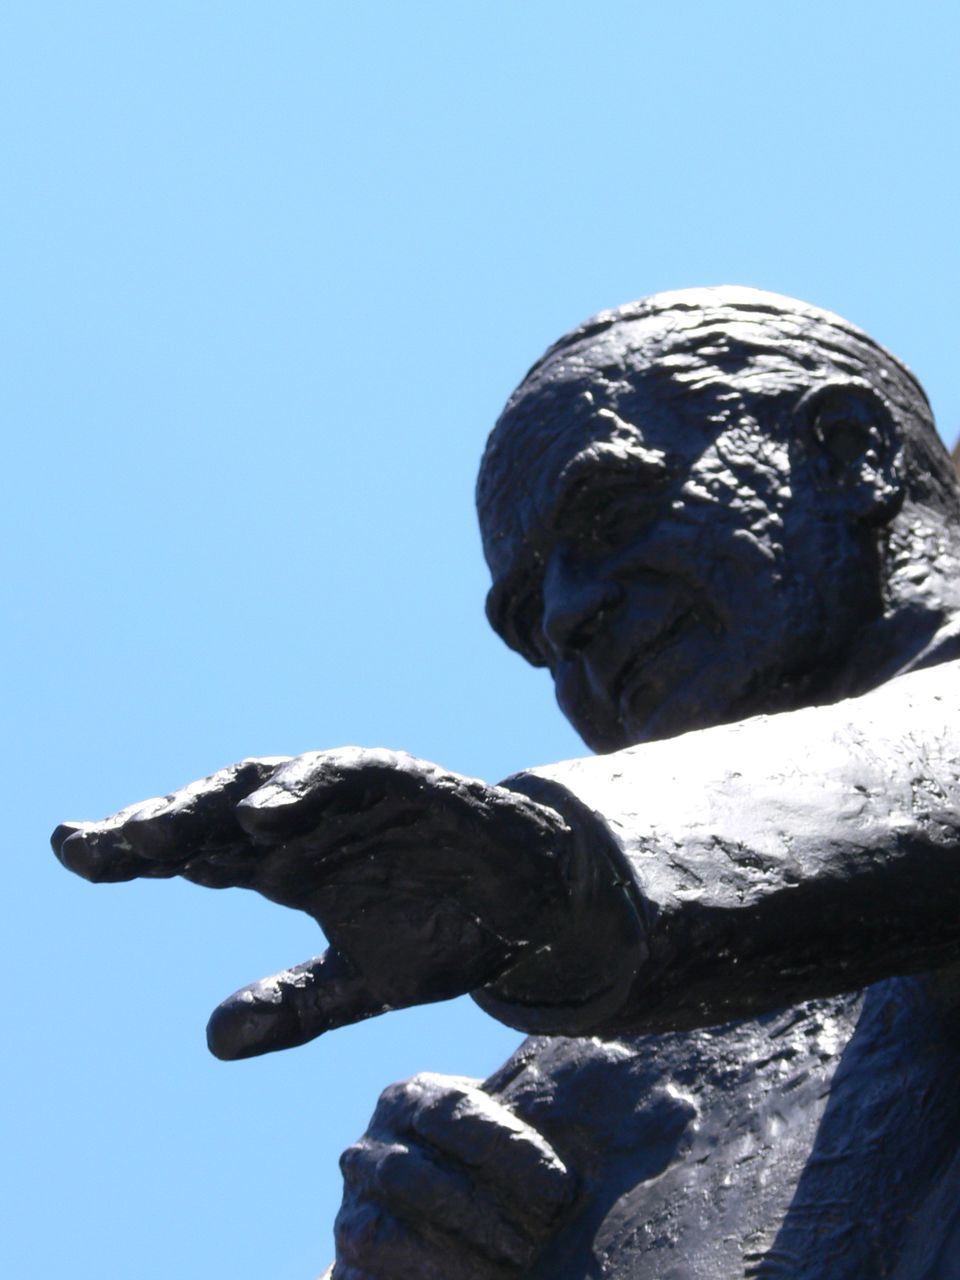 CLOSE-UP OF STATUE AGAINST BLUE SKY